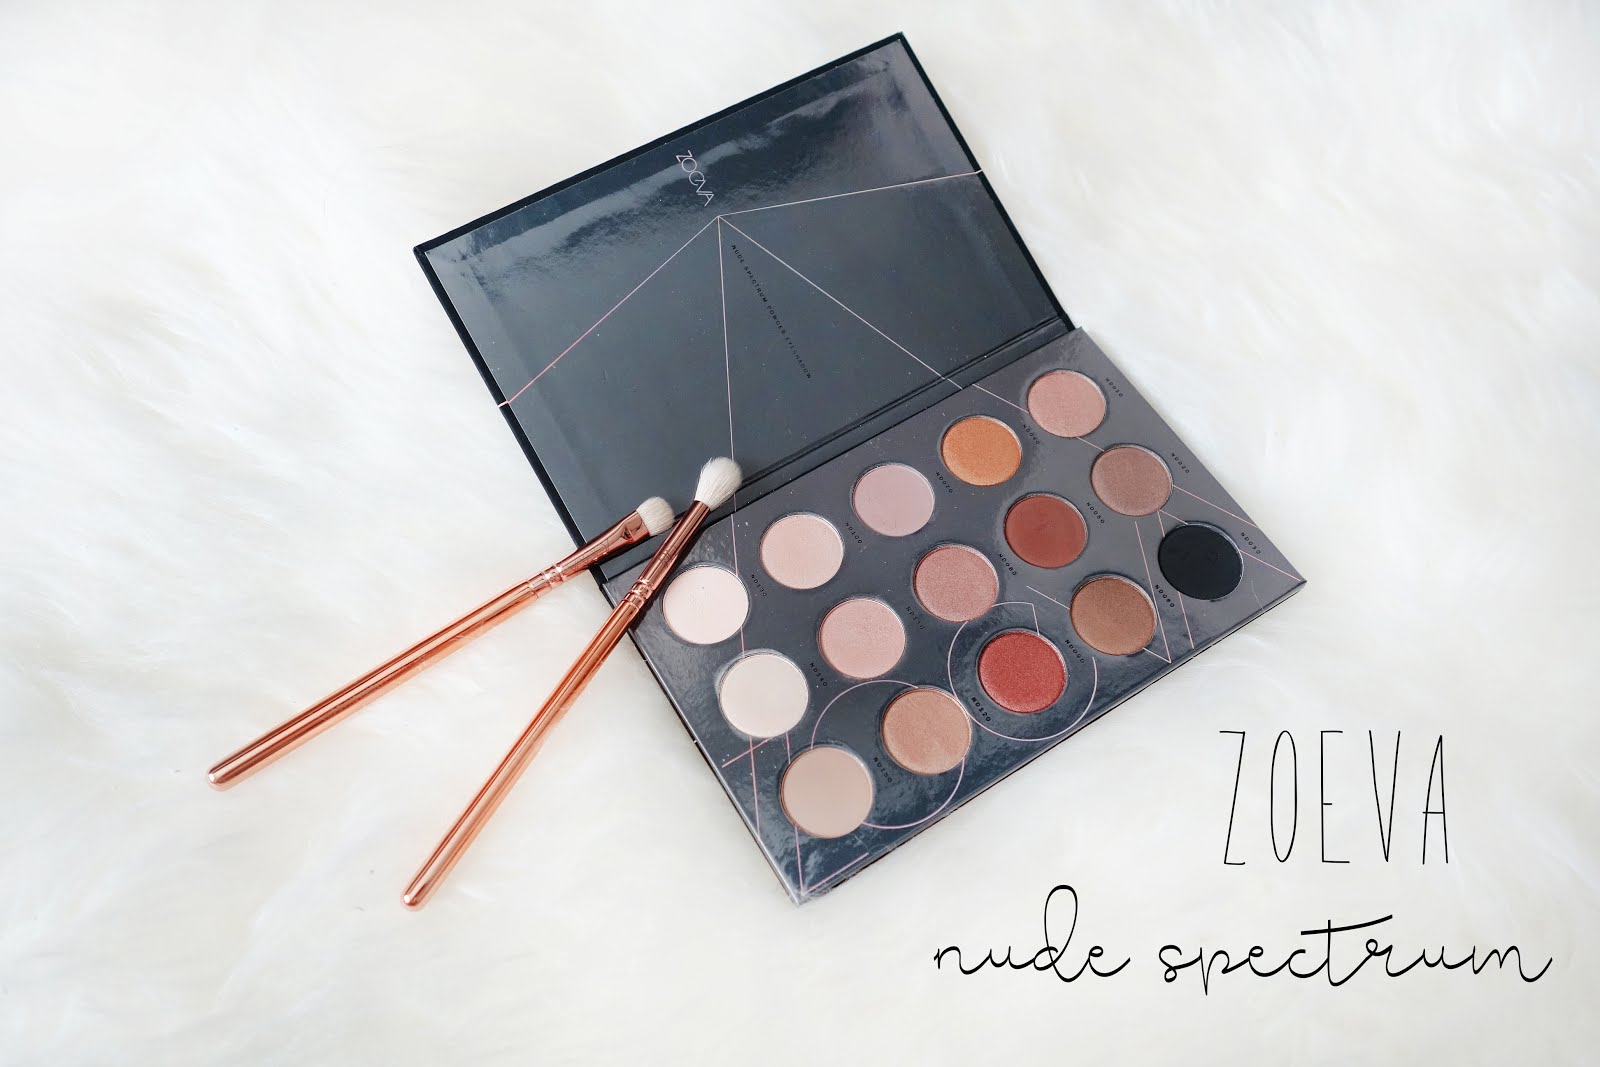 Zoeva Nude Spectrum Eyeshadow Palette Review and Swatches Xueqi's Beau...